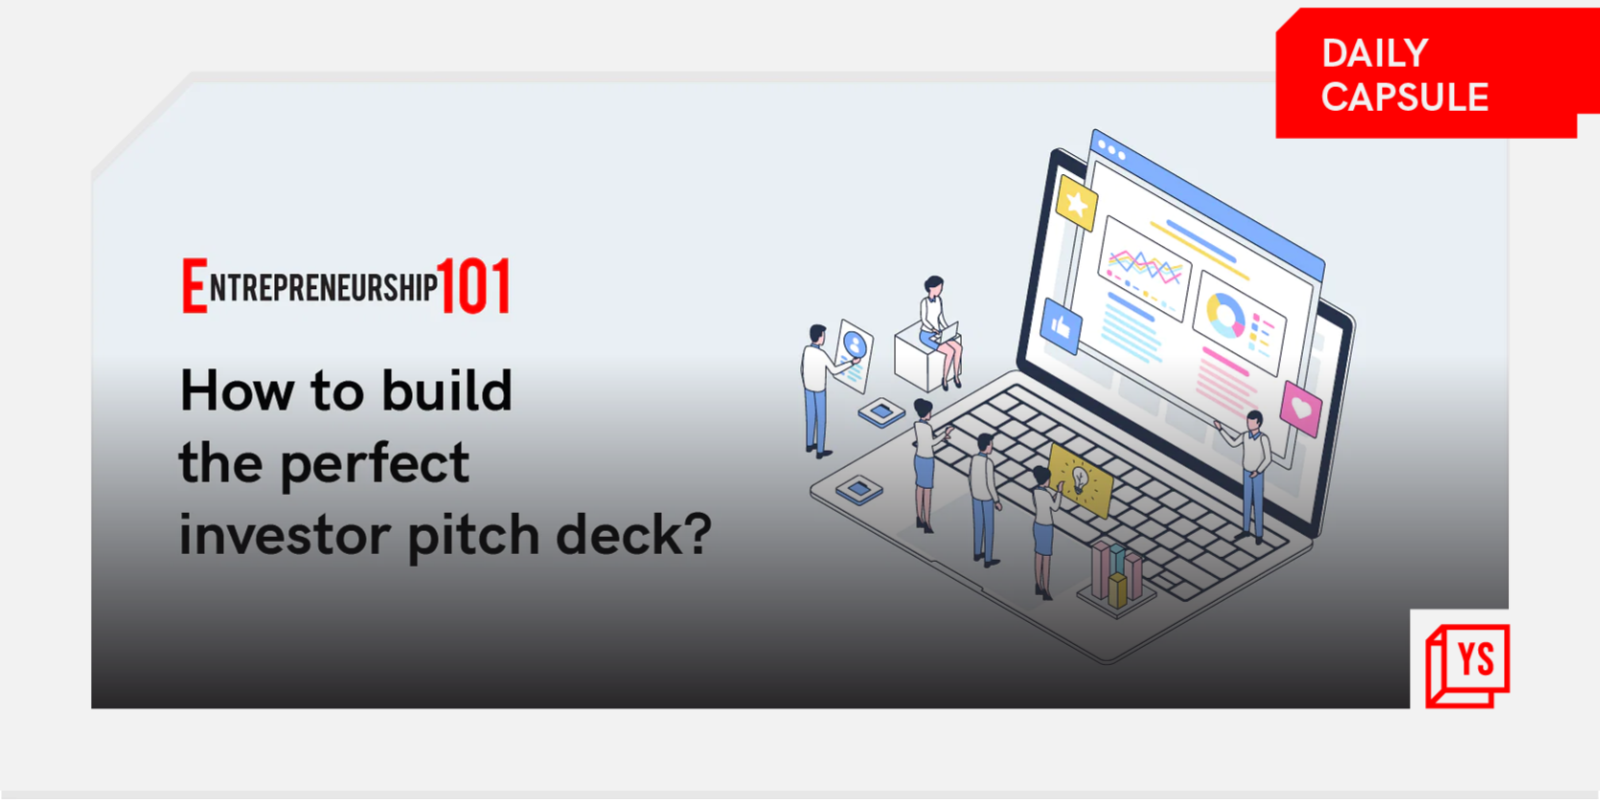 How to build the perfect pitch deck?